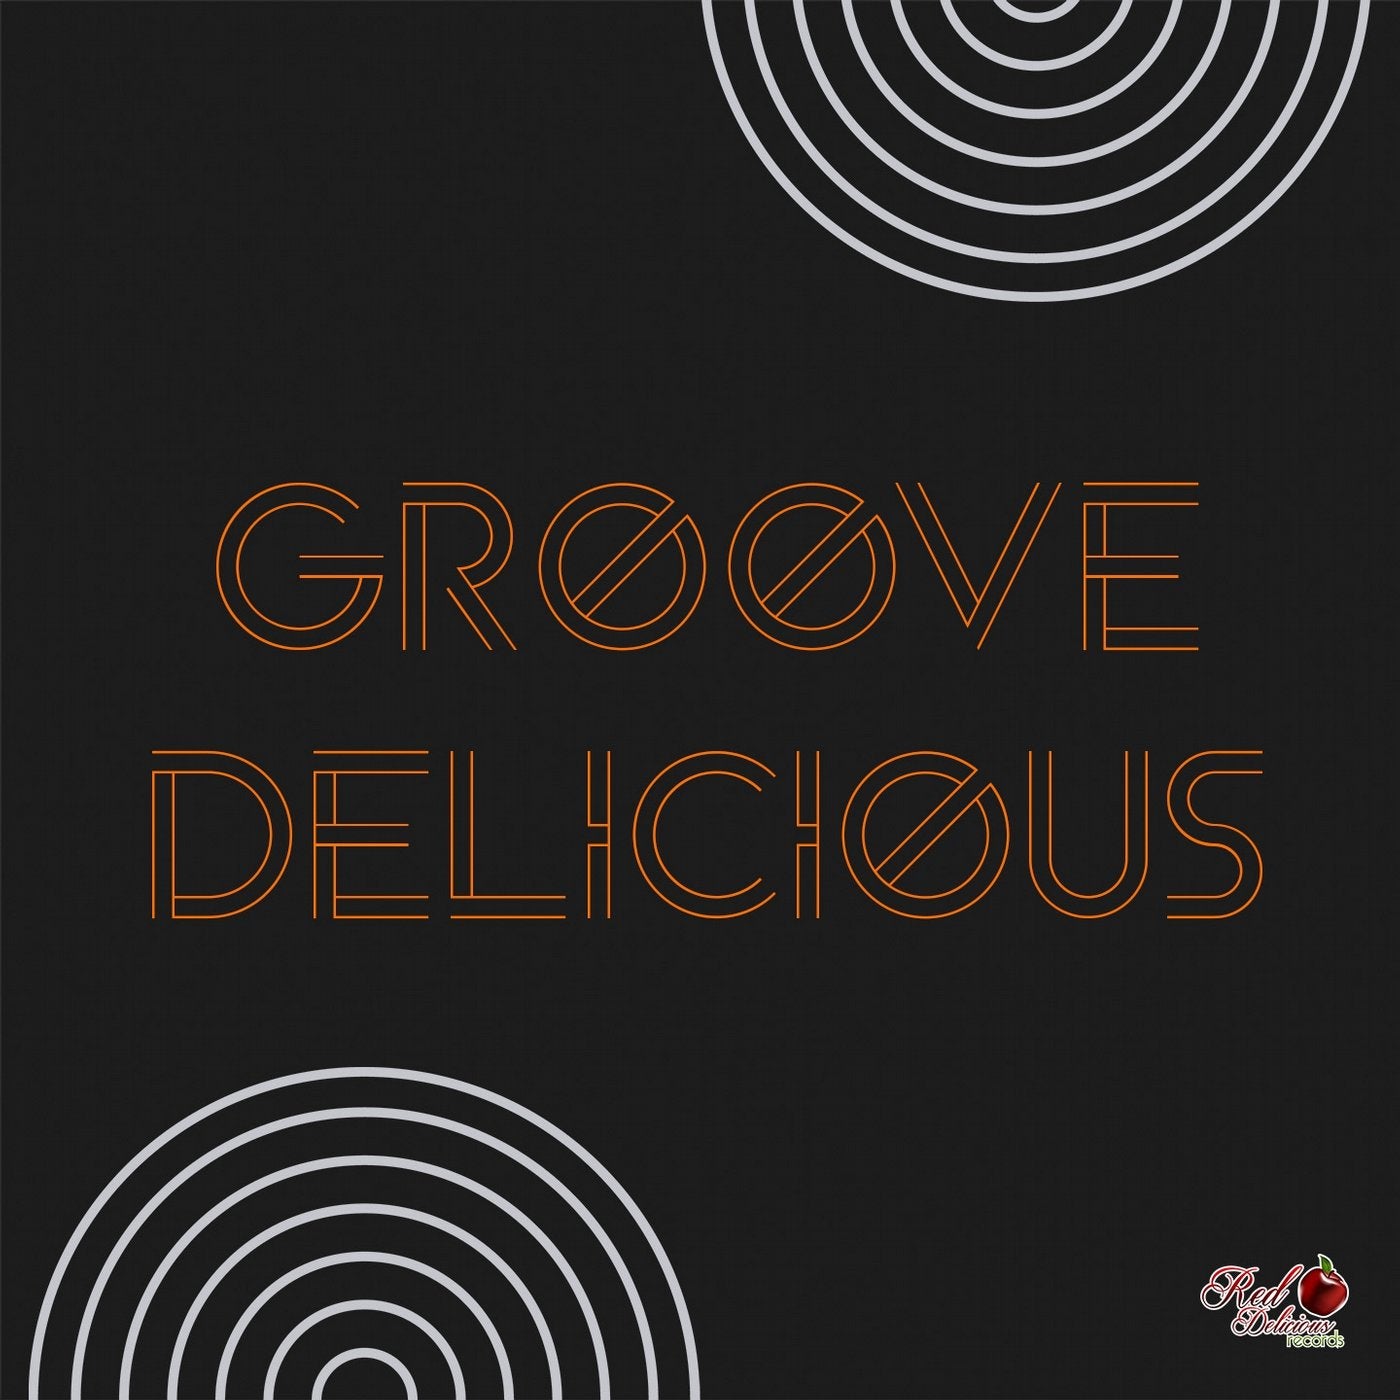 Groove Delicious